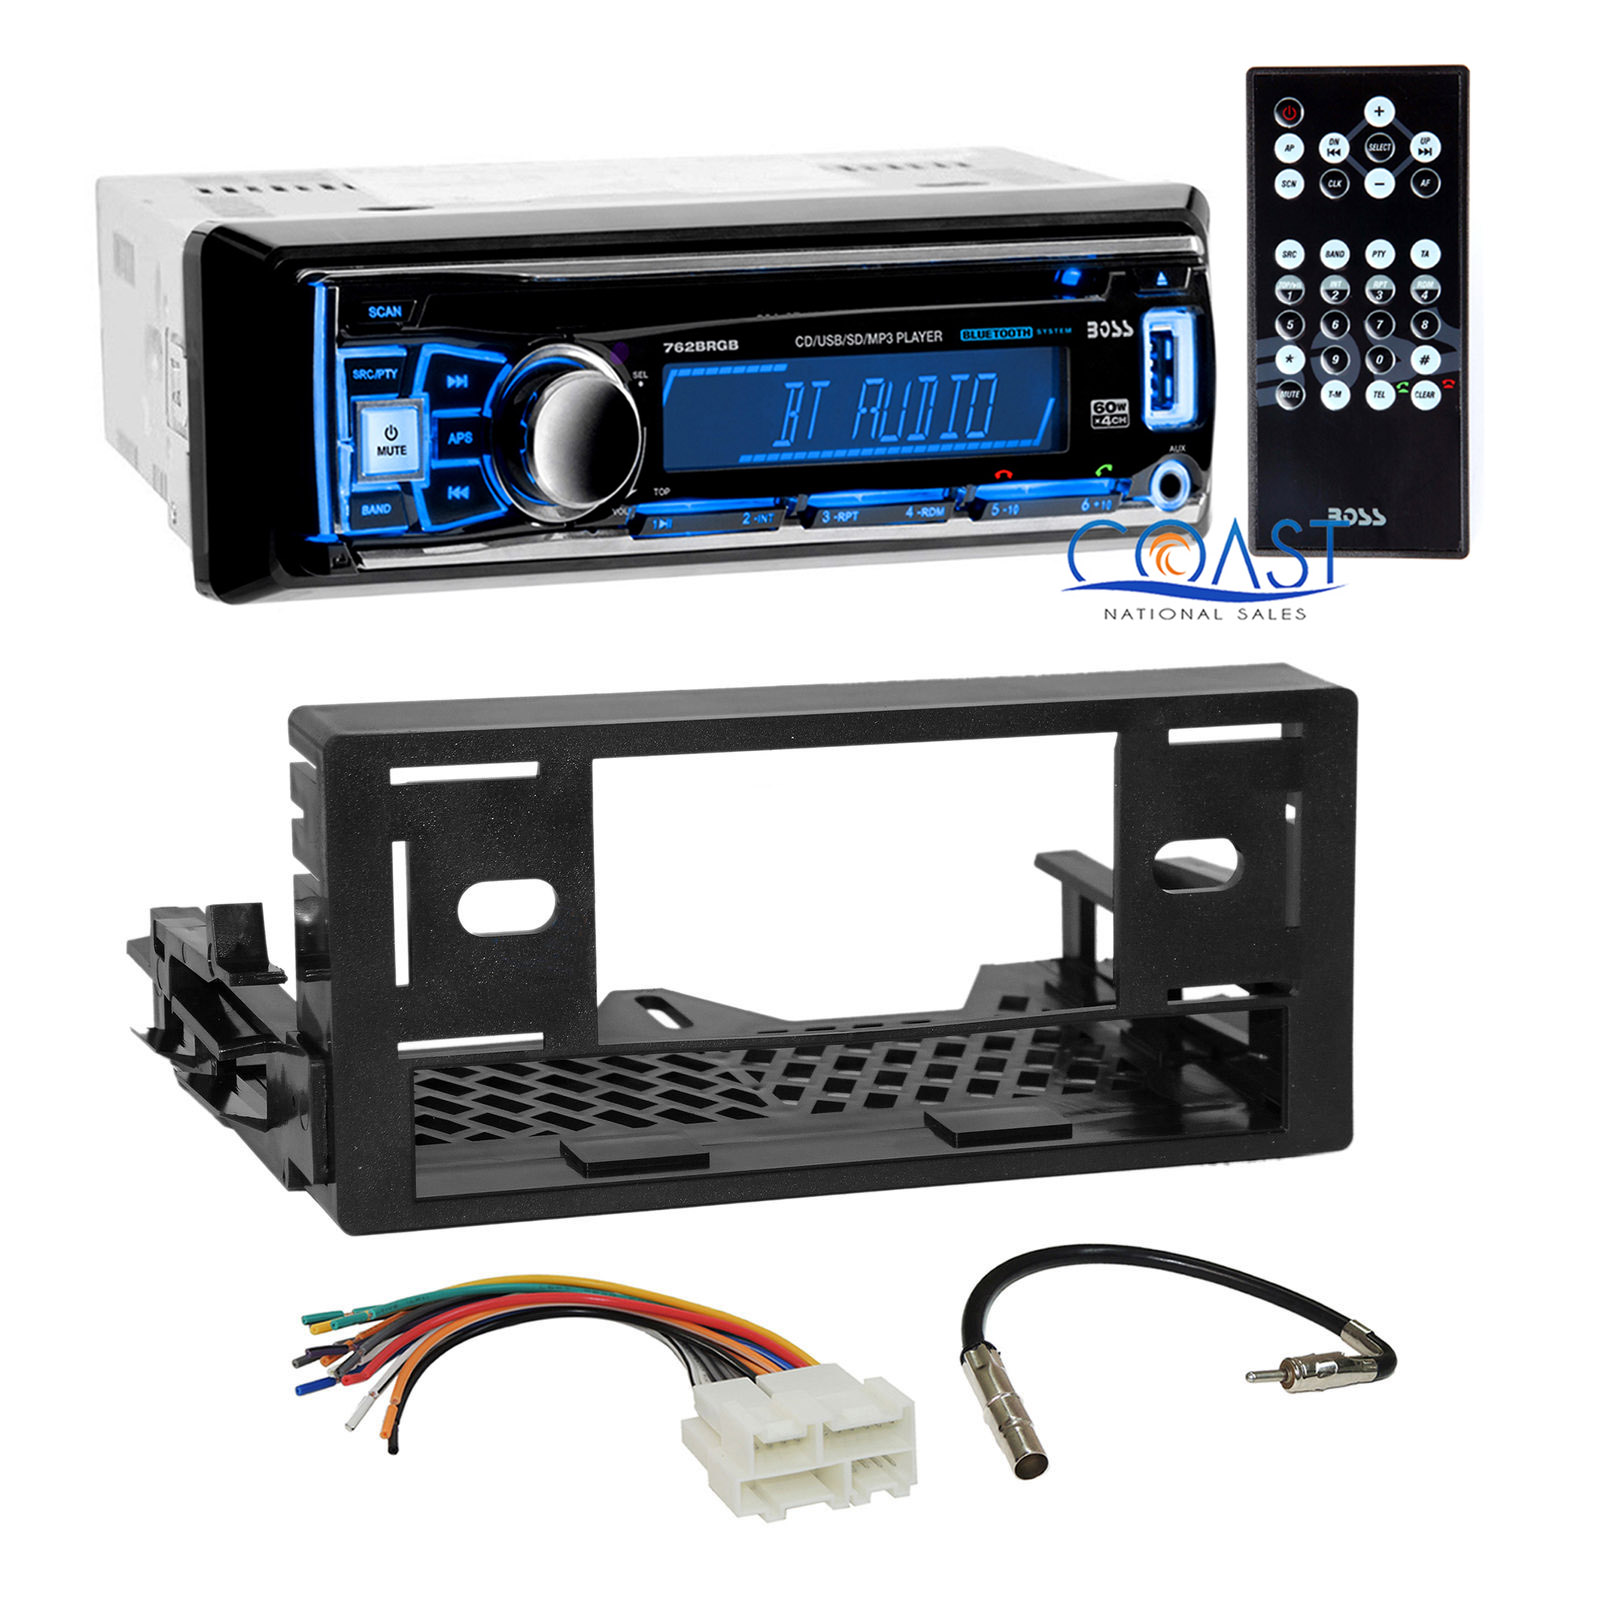 Scosche Car Stereo Wiring Connector Diagram For A 05 Jeep Liberty from coastnationalsales.com